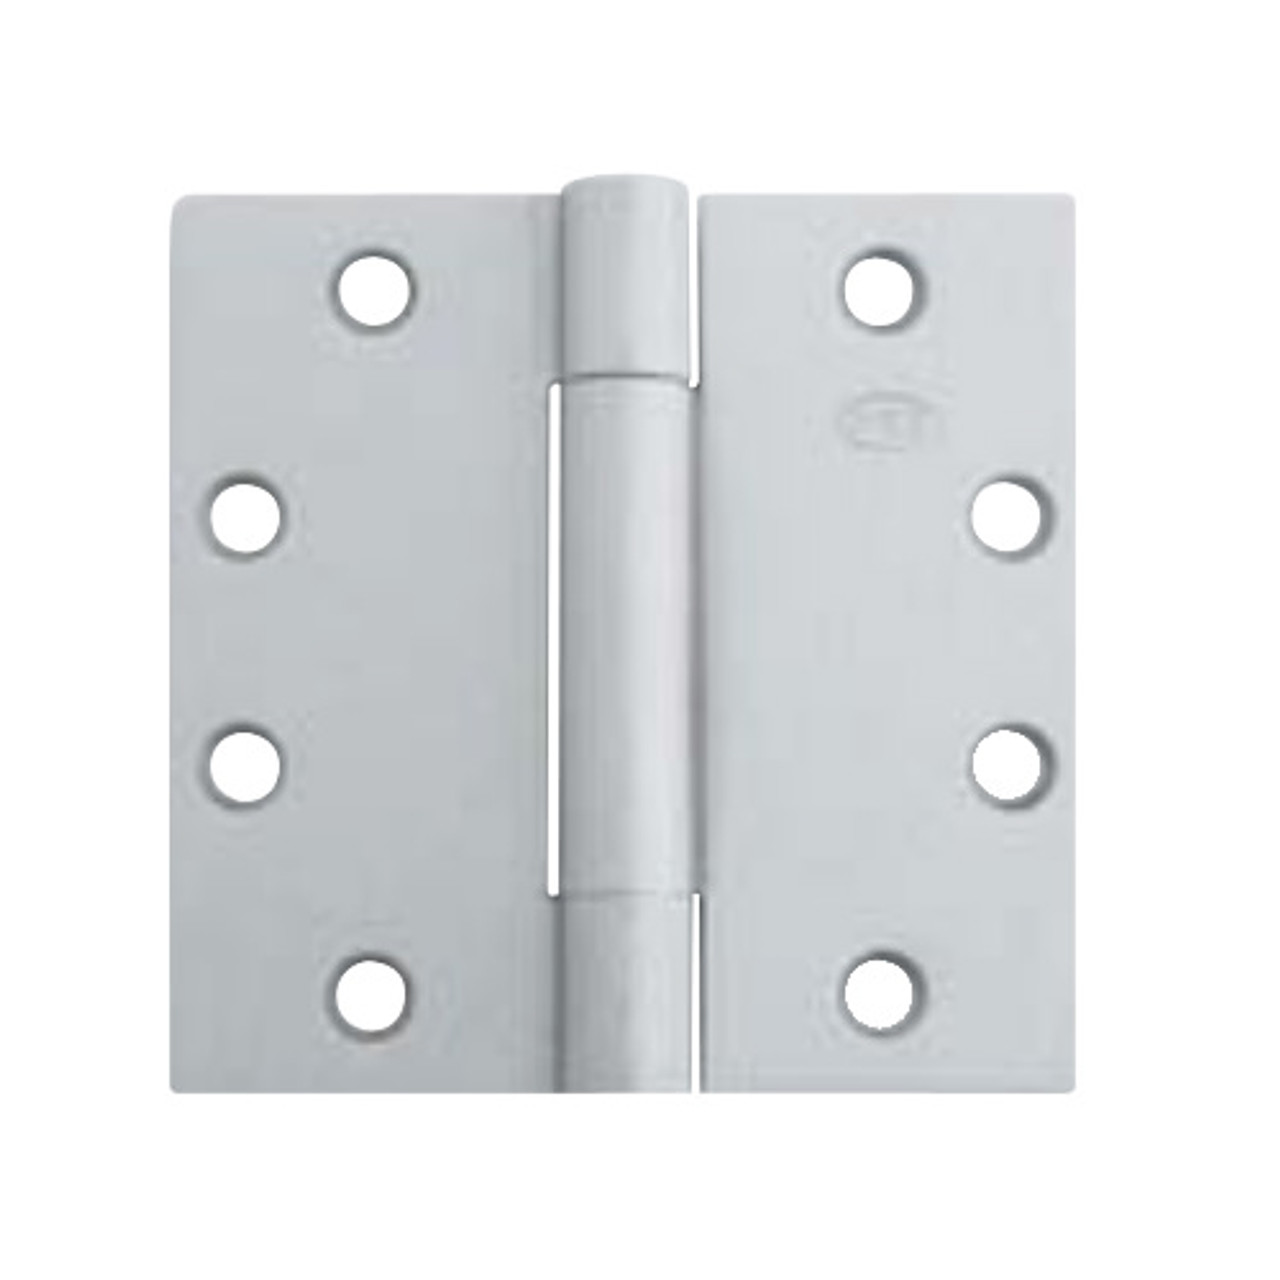 3CB1-4-5x4-600 IVES 3 Knuckle Concealed Bearing Full Mortise Hinge in Primed for Paint - Steel